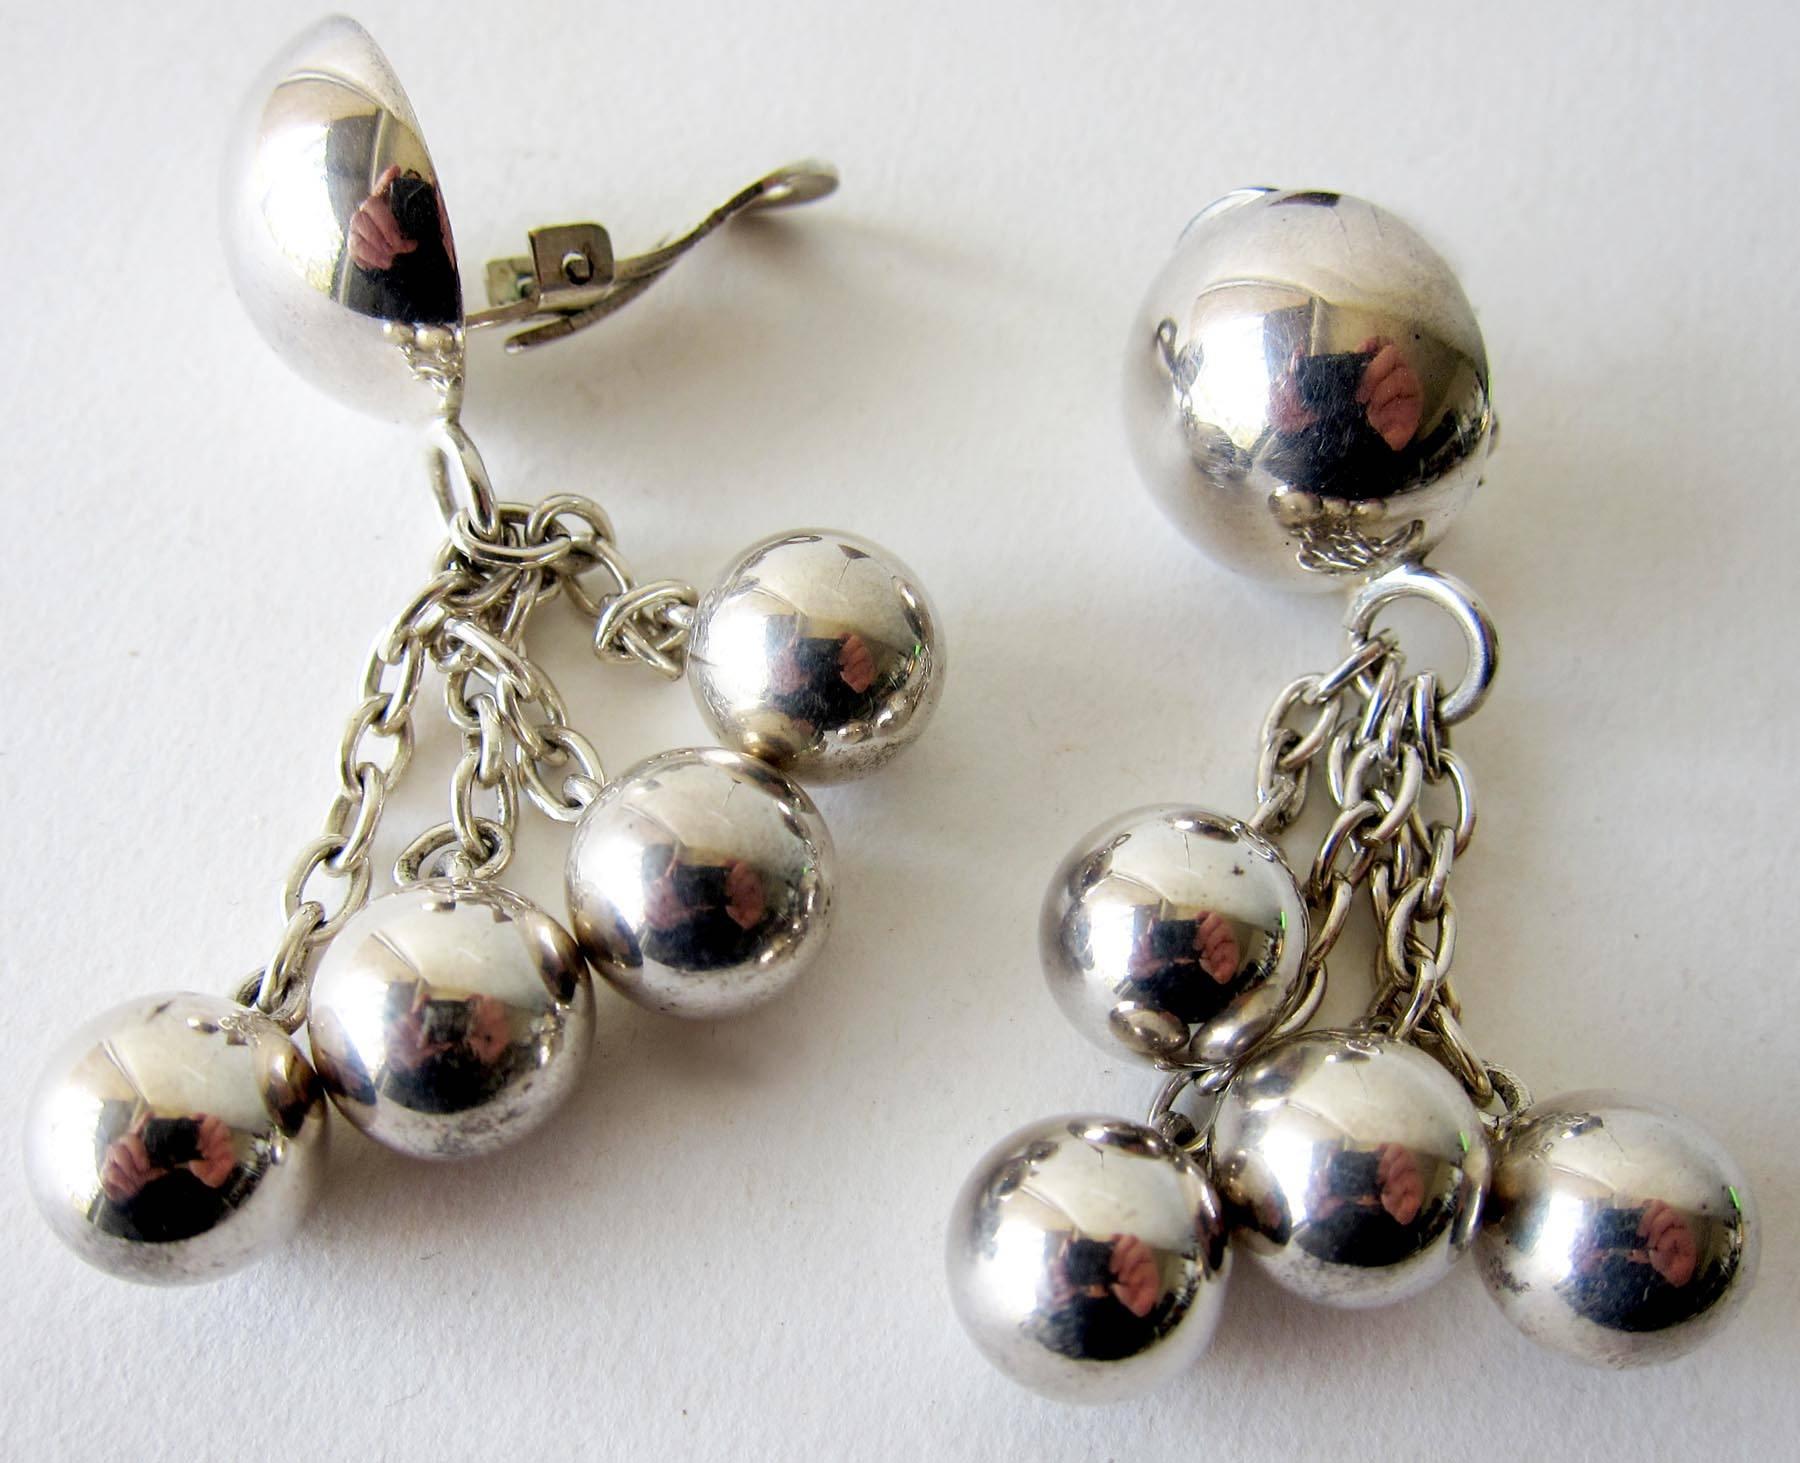 Modernist ball and chain earrings created by José Maria Puig Doria of Barcelona, Spain.  Clip back earrings make a lovely light sound when worn.  They measure 2.5